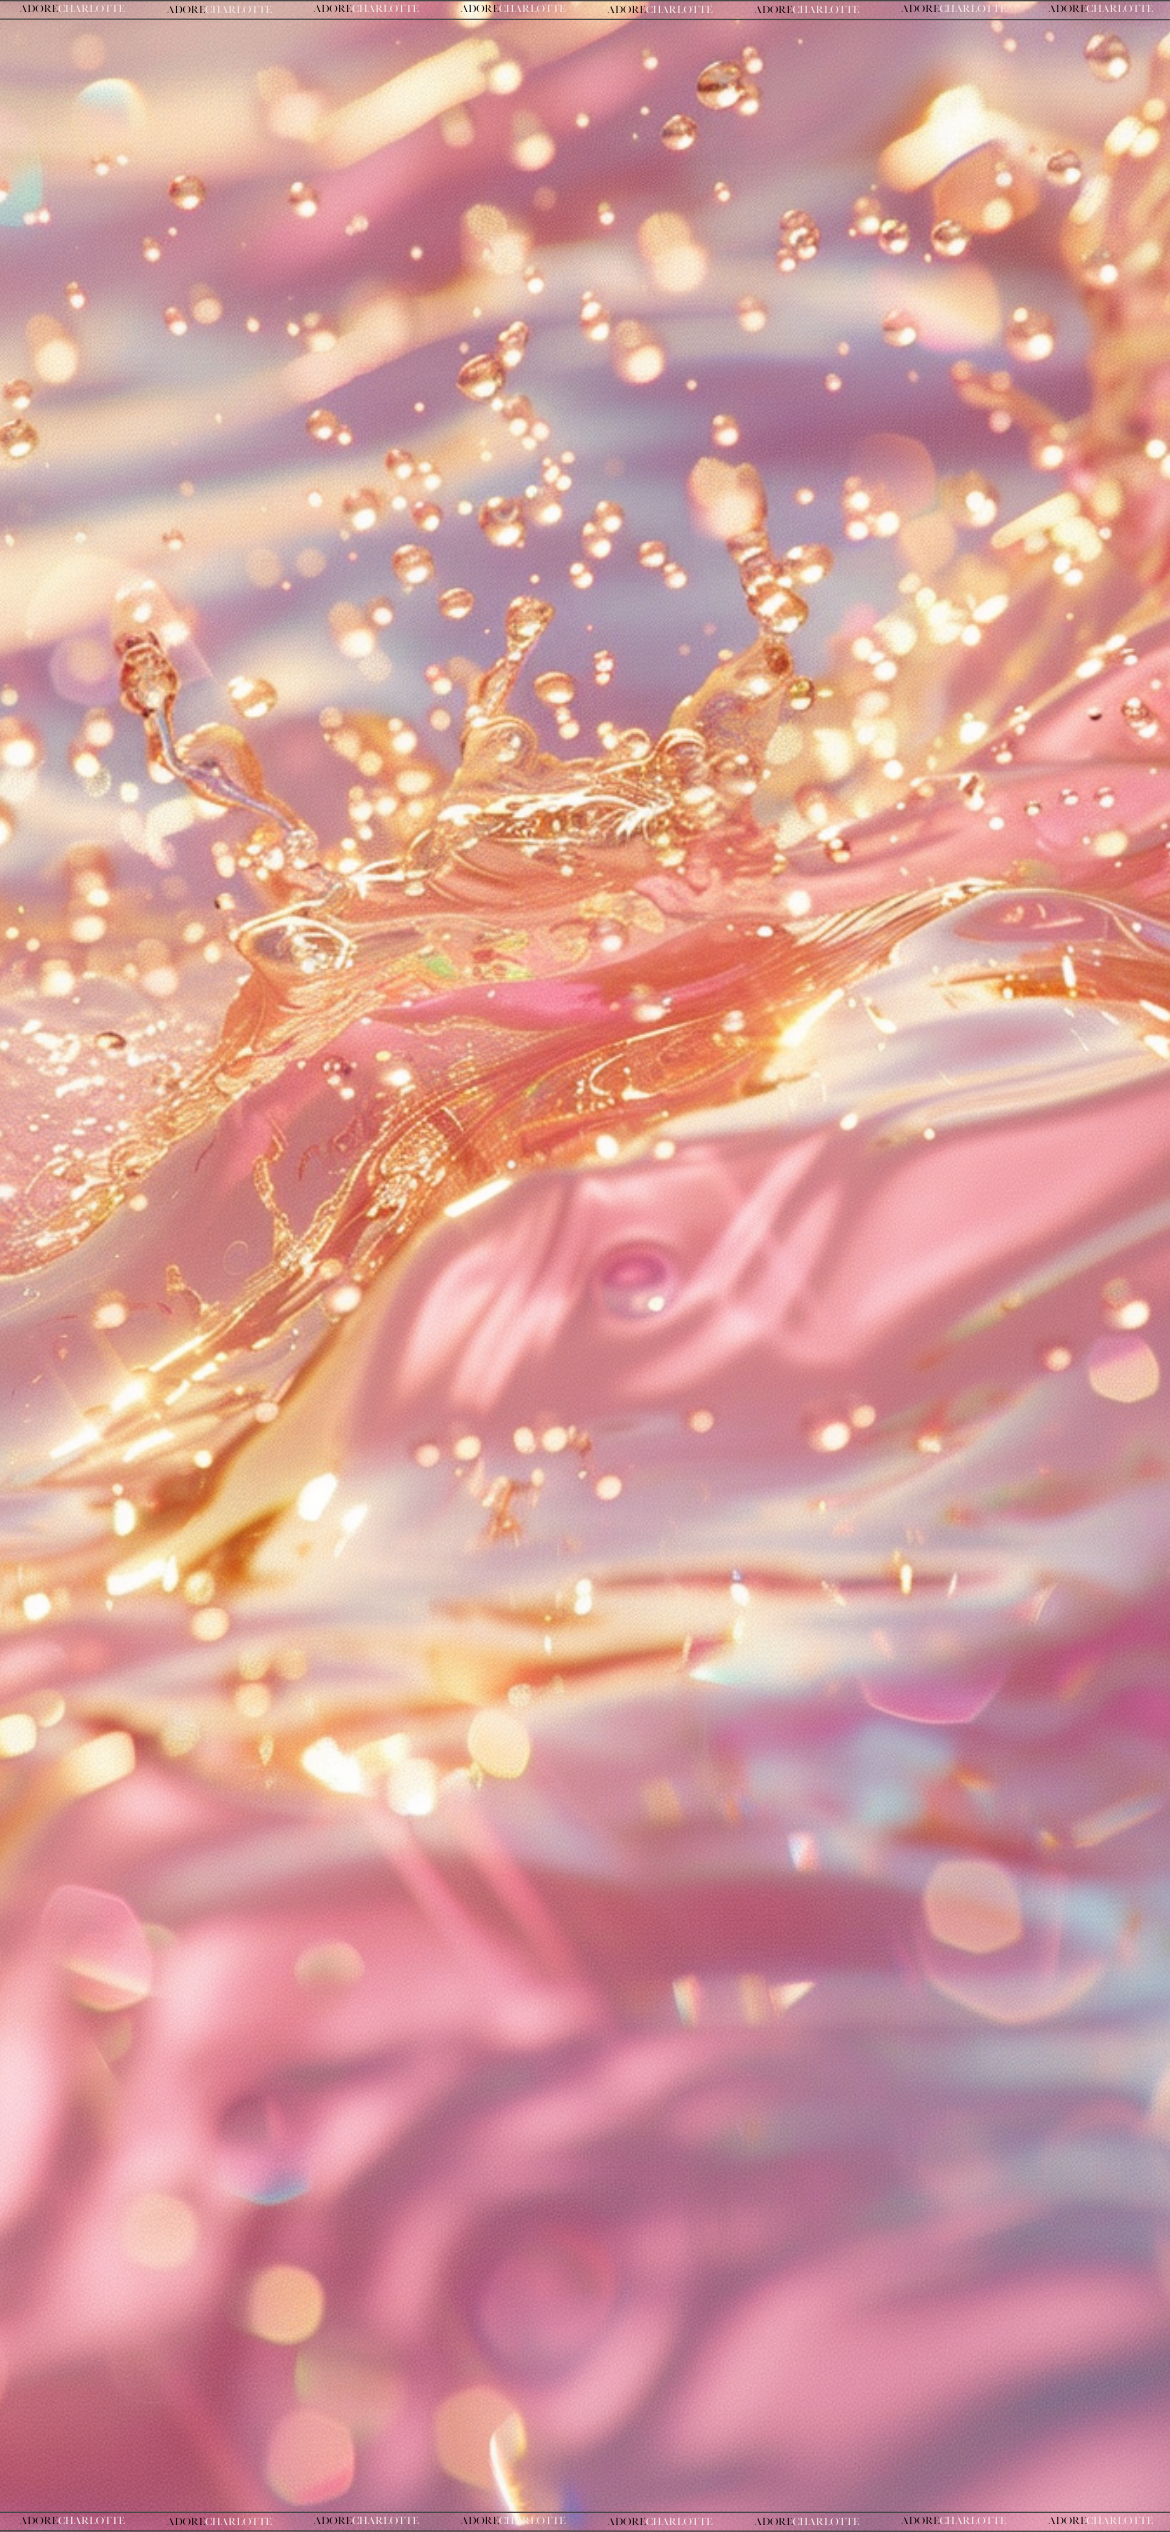 Pink and Gold Glitter Water Phone Wallpapers.